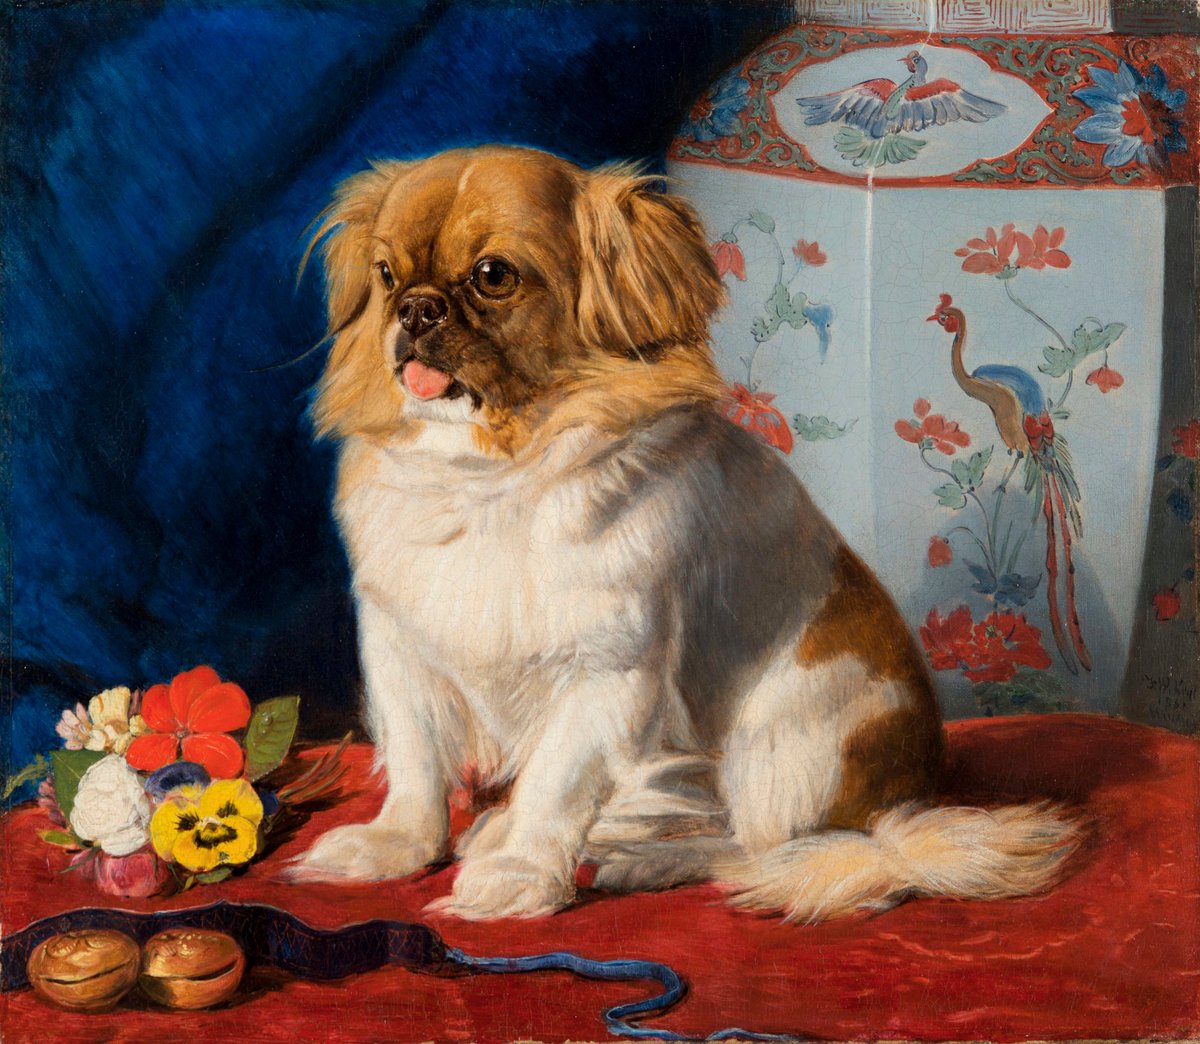  #NationalPetMonth post. Looty, a little Pekingese dog literally looted in 1860 from the Summer Palace apartments of her previous owner, the Xianfeng Emperor's aunt who had taken her own life. Dog was presented to Queen Victoria and portrait exhibited at the Royal Academy in 1862.